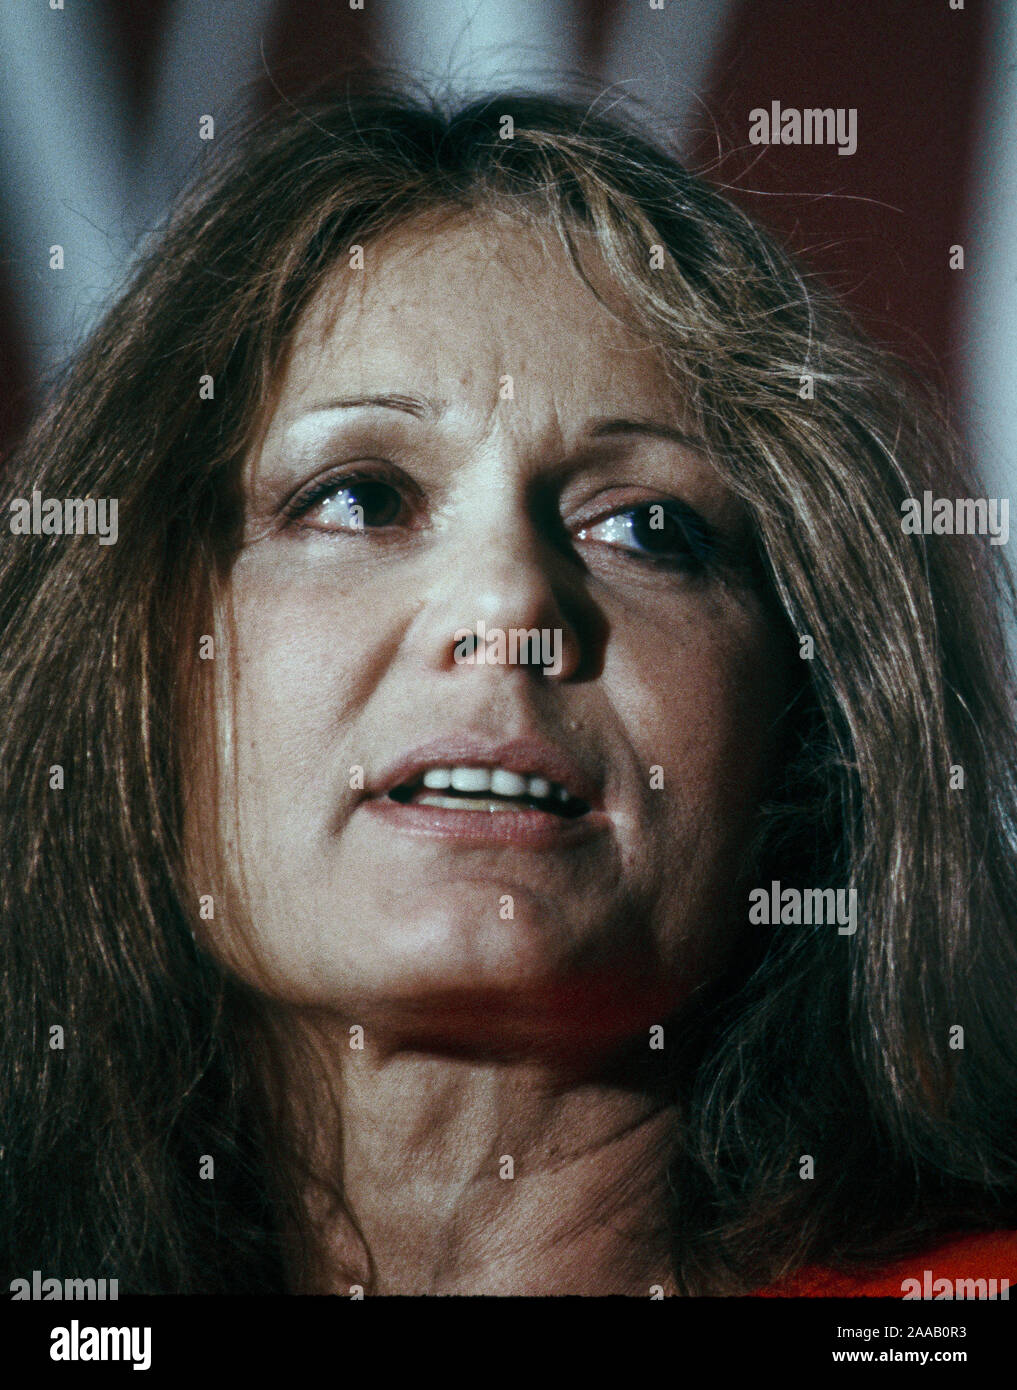 Washington, DC USA. 1988 Portrait of Gloria Steinem.  Steinem is an American feminist, journalist, and social and political activist who became nationally recognized as a leader and spokeswoman for the feminist movement in the late 1960s and early 70s. Credit: Mark Reinstein Stock Photo